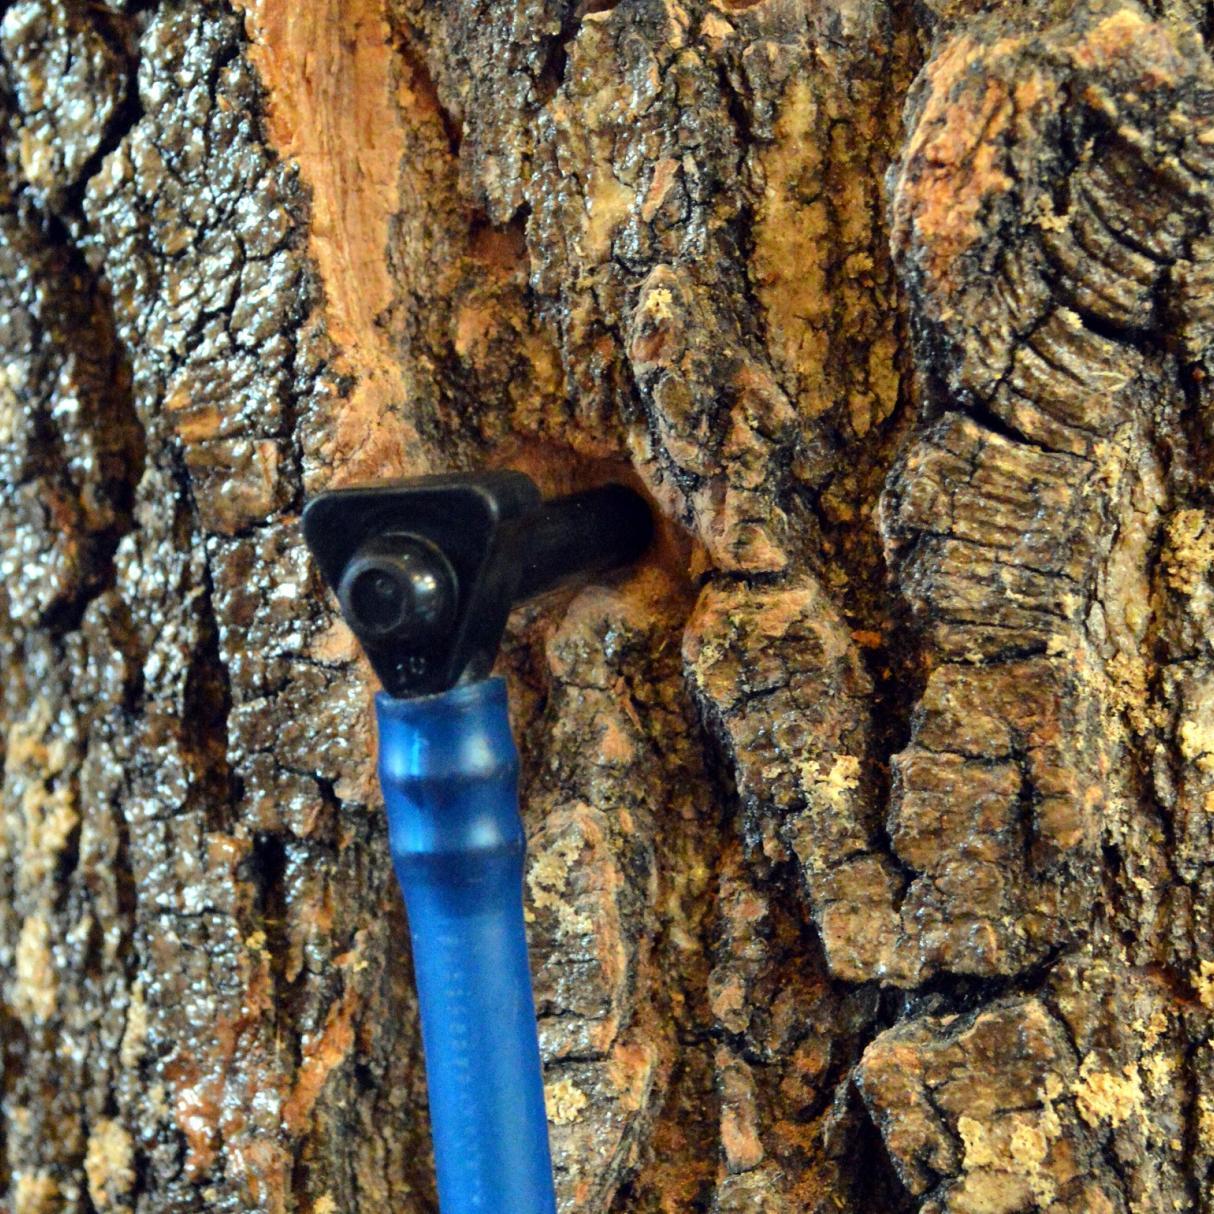 Tapped tree